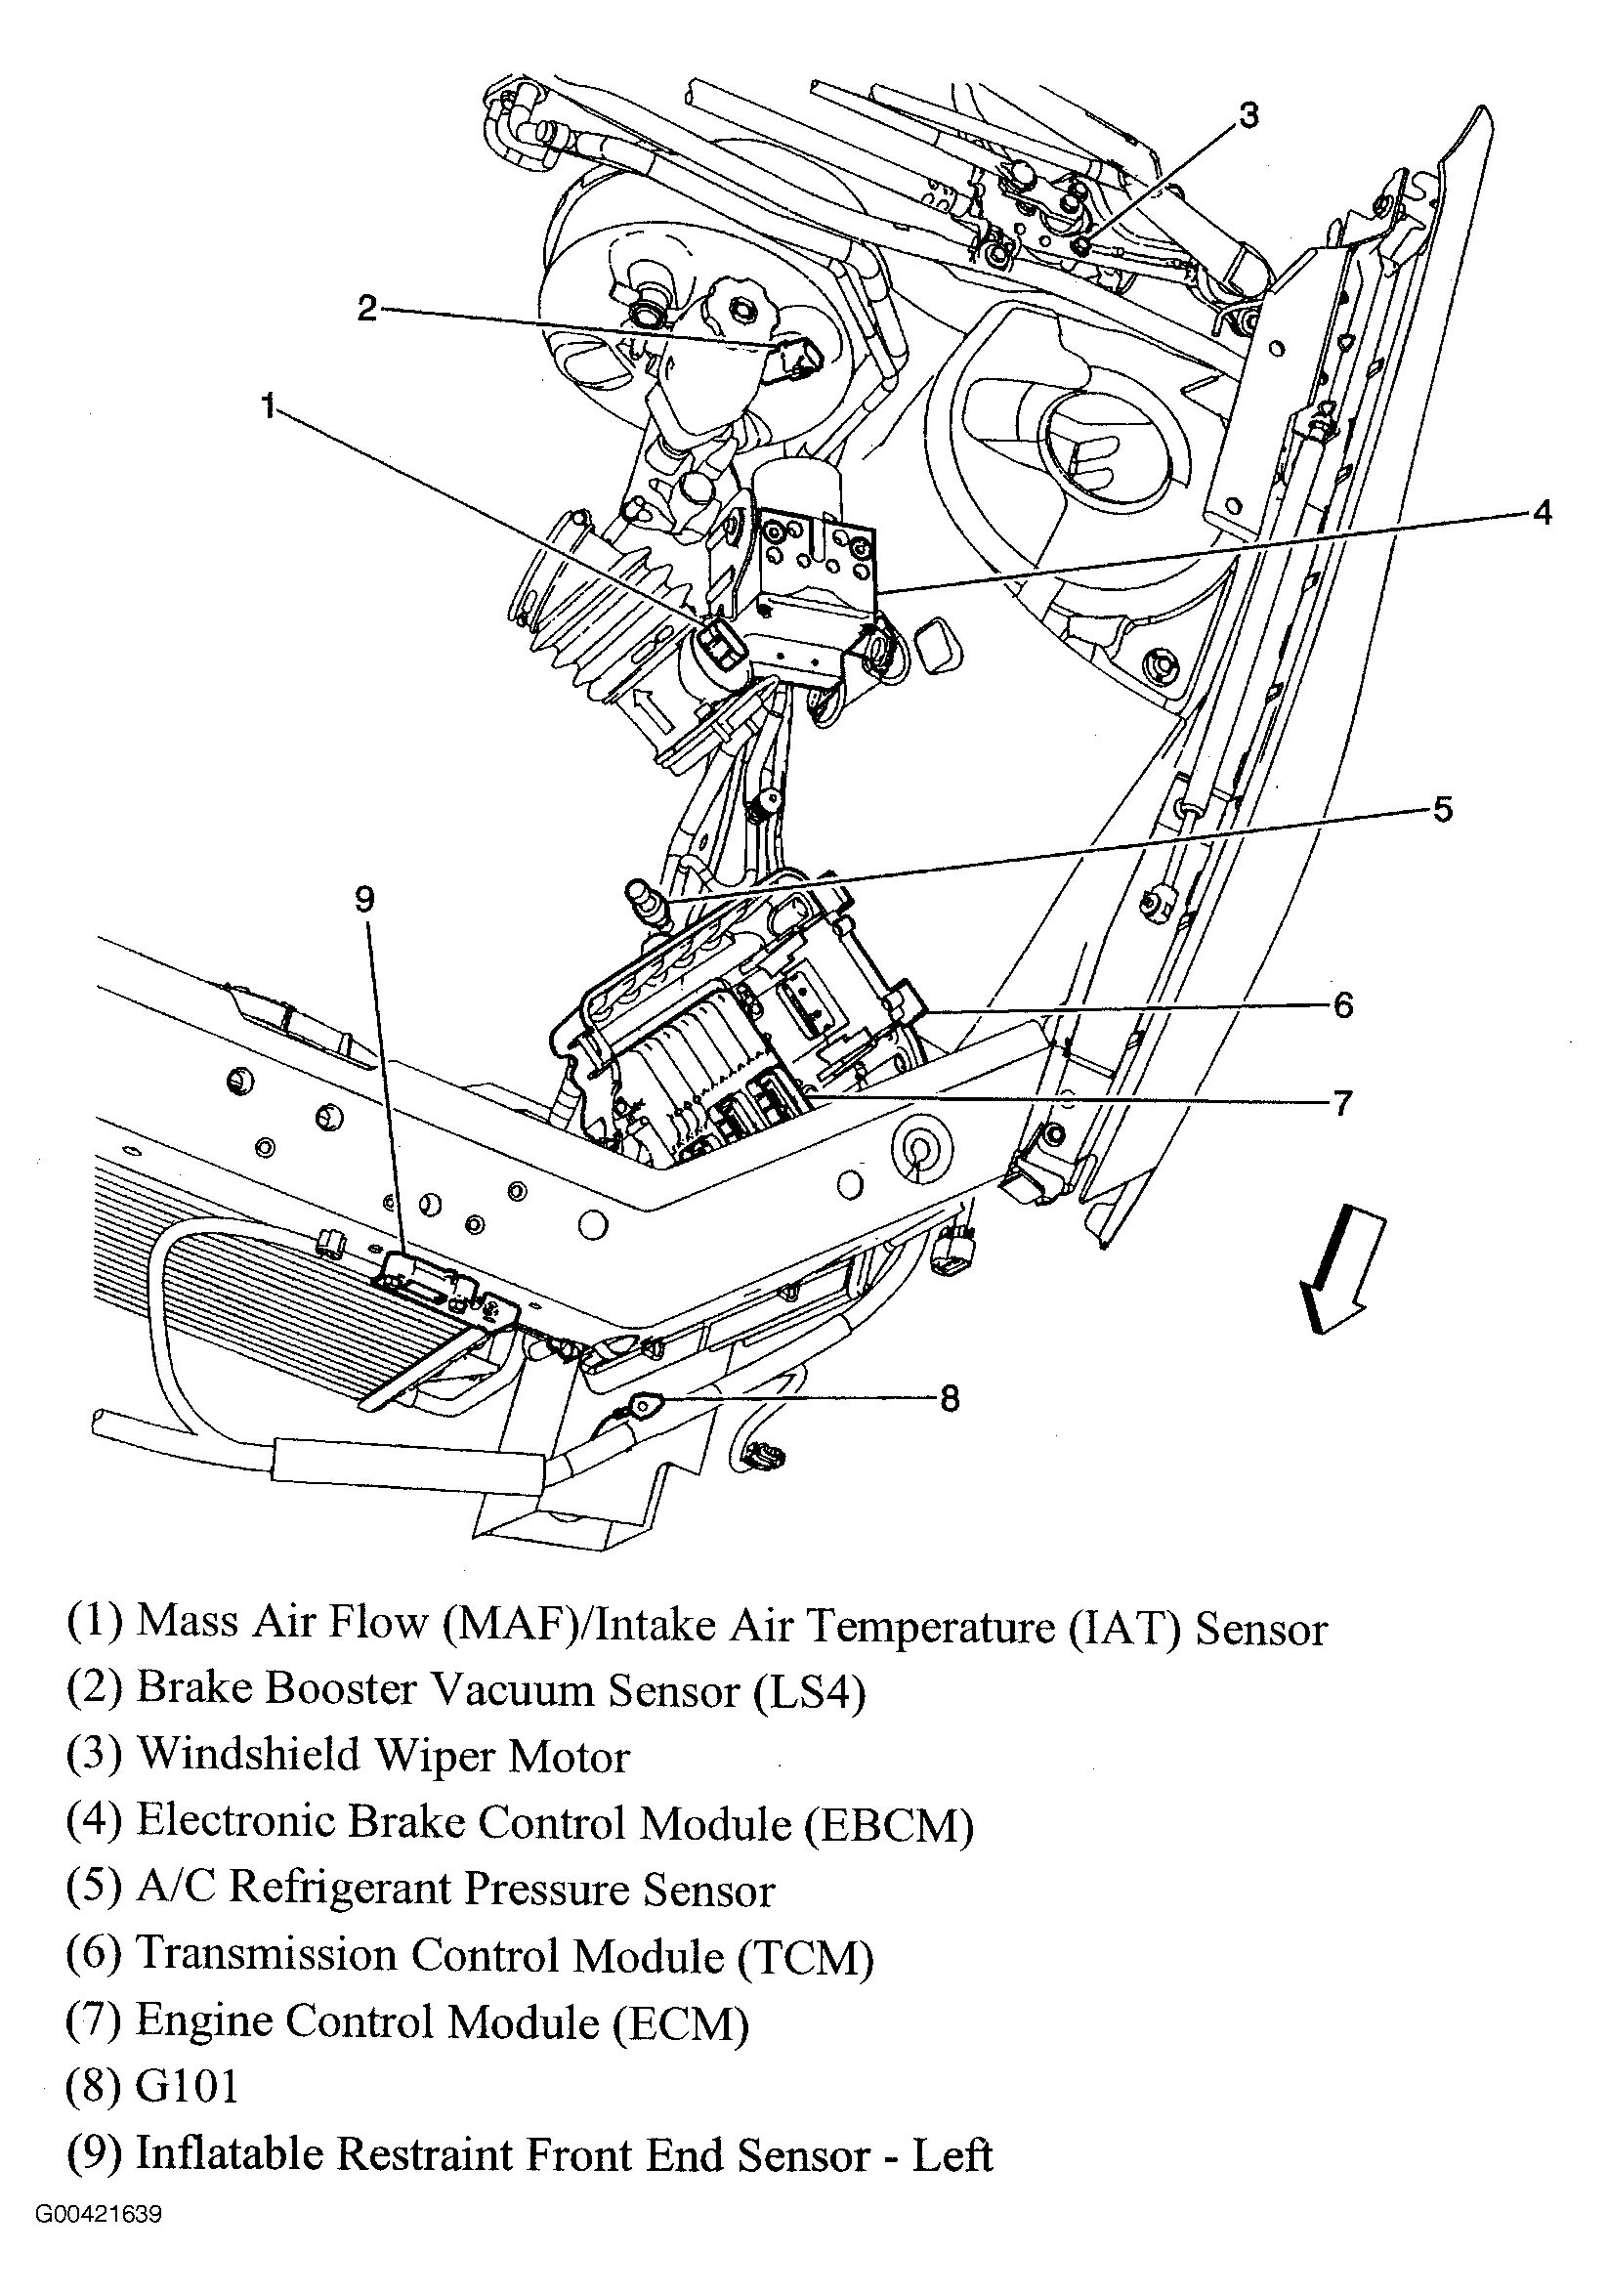 Chevrolet Monte Carlo LT 2006 - Component Locations -  Left Front Of Engine Compartment